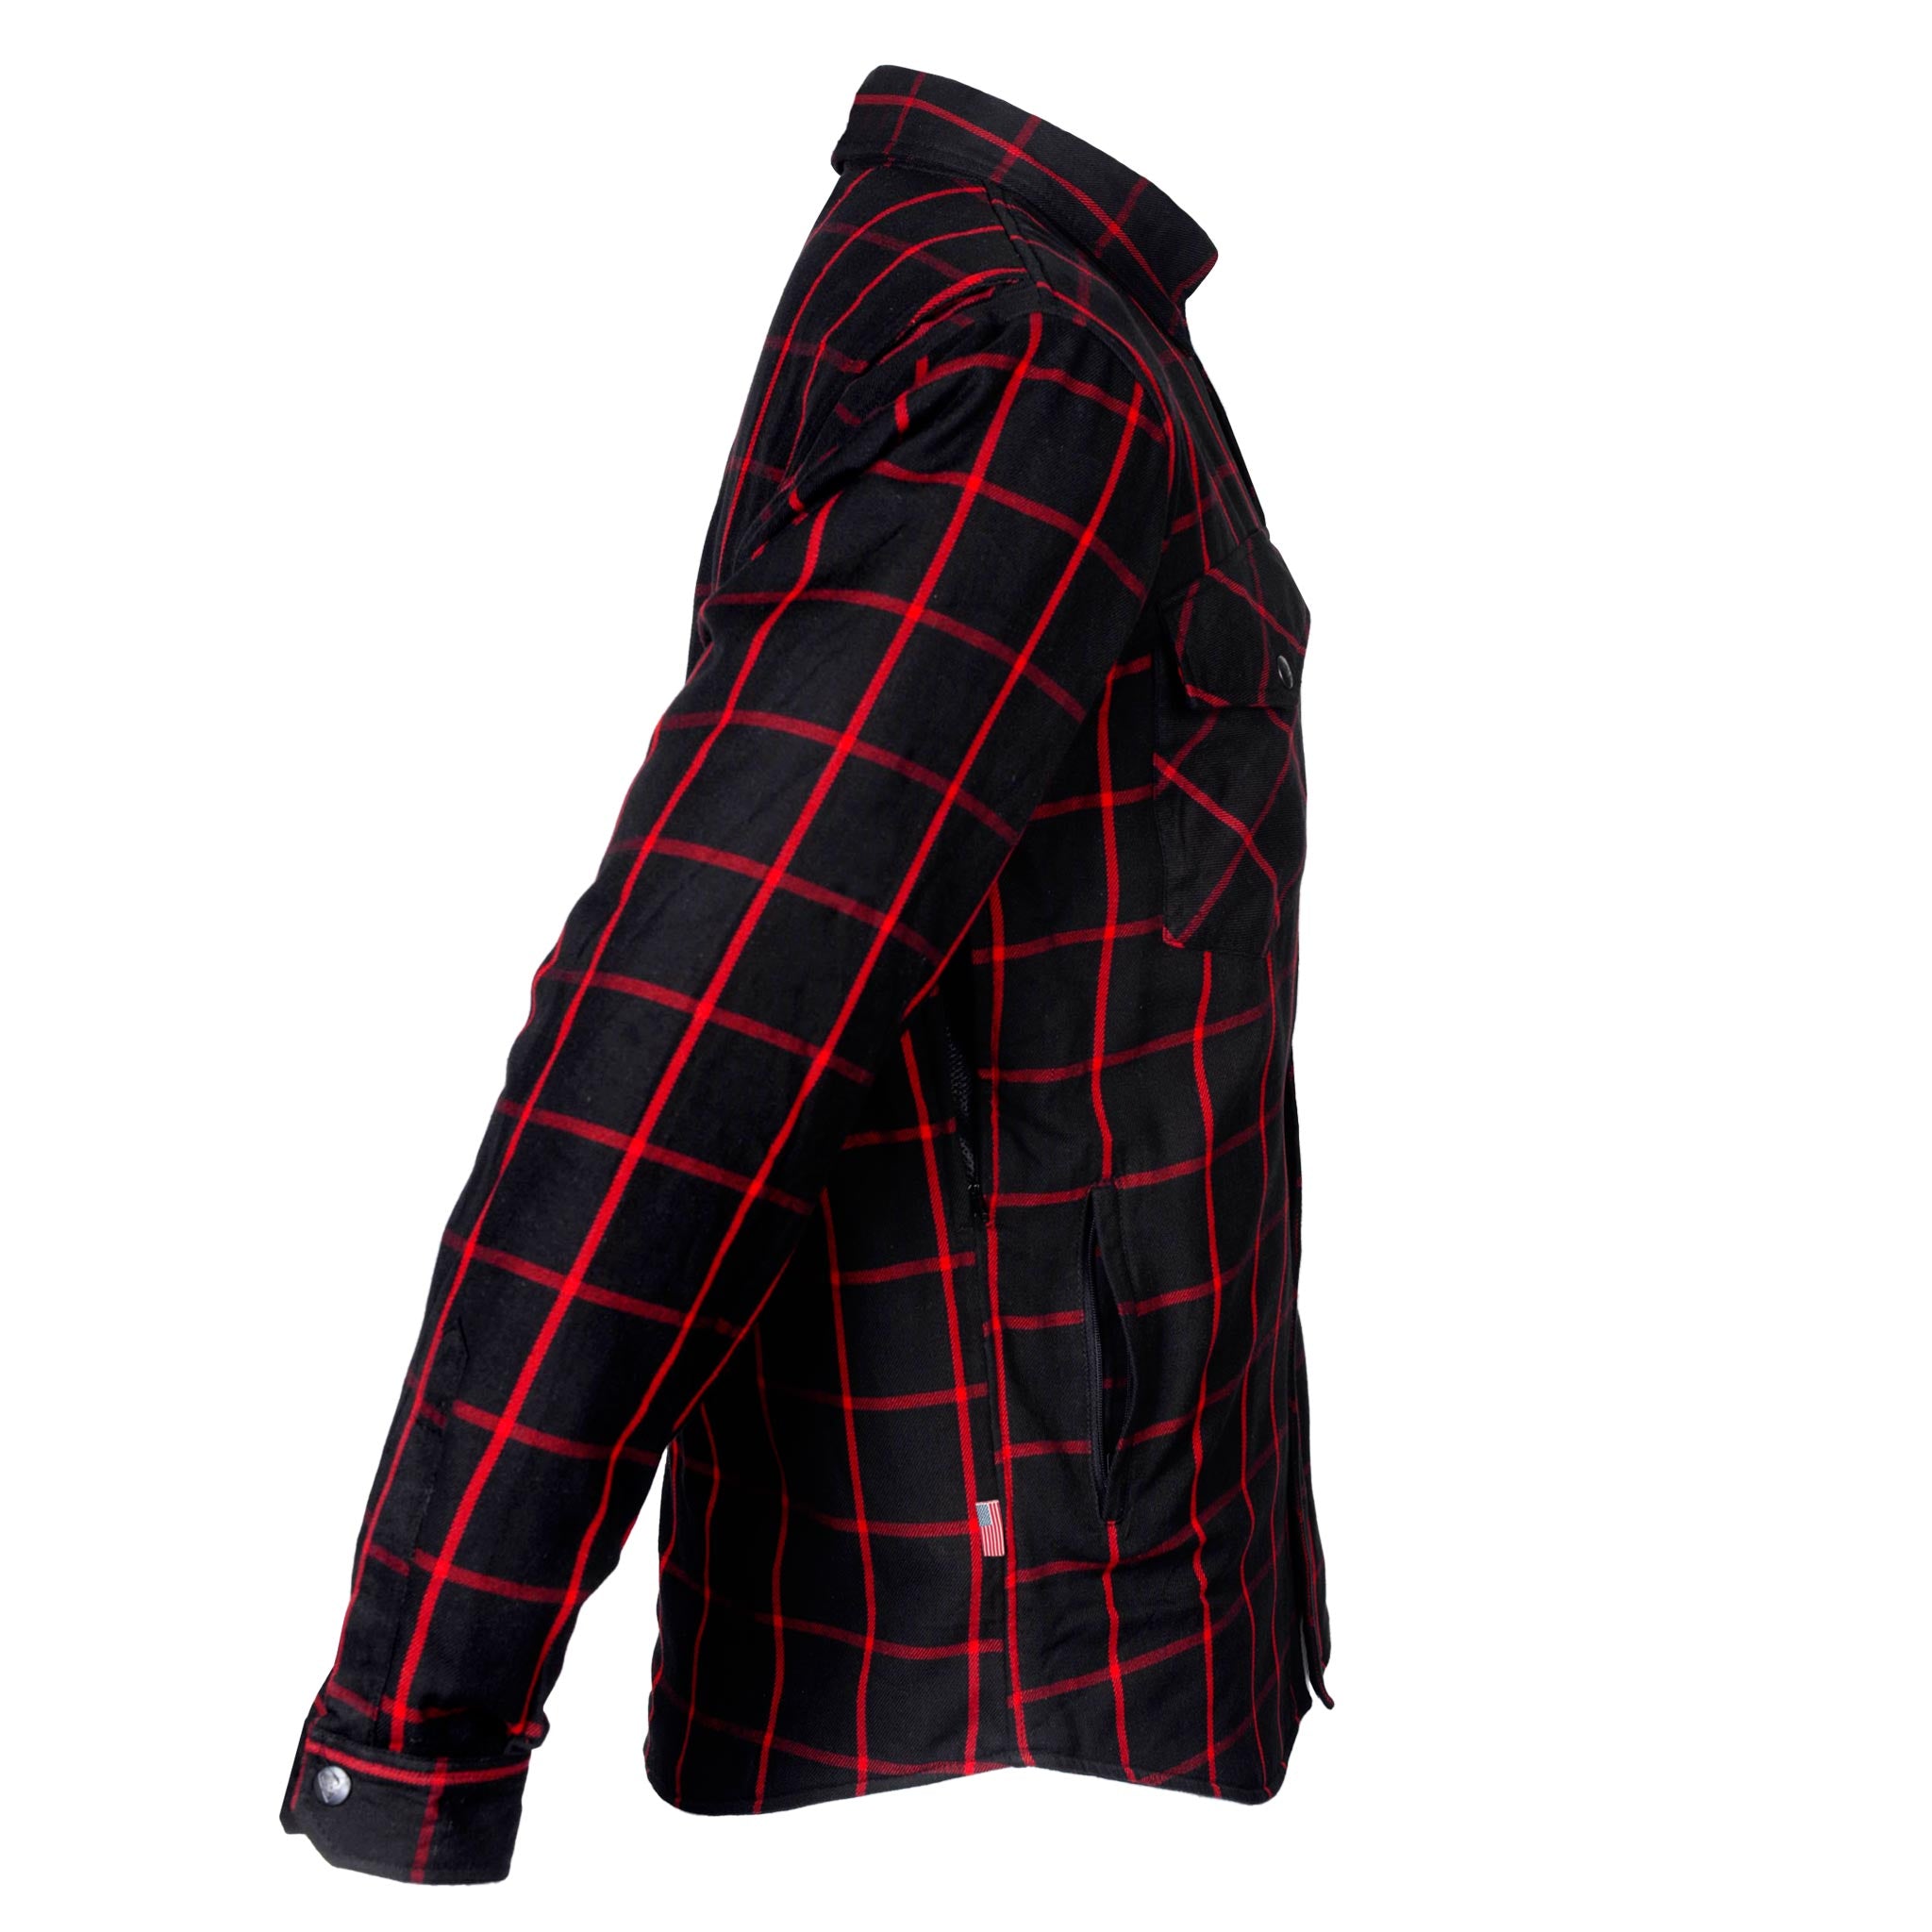 Protective Flannel Shirt "Crimson Lane" - Black and Red Stripes with Pads